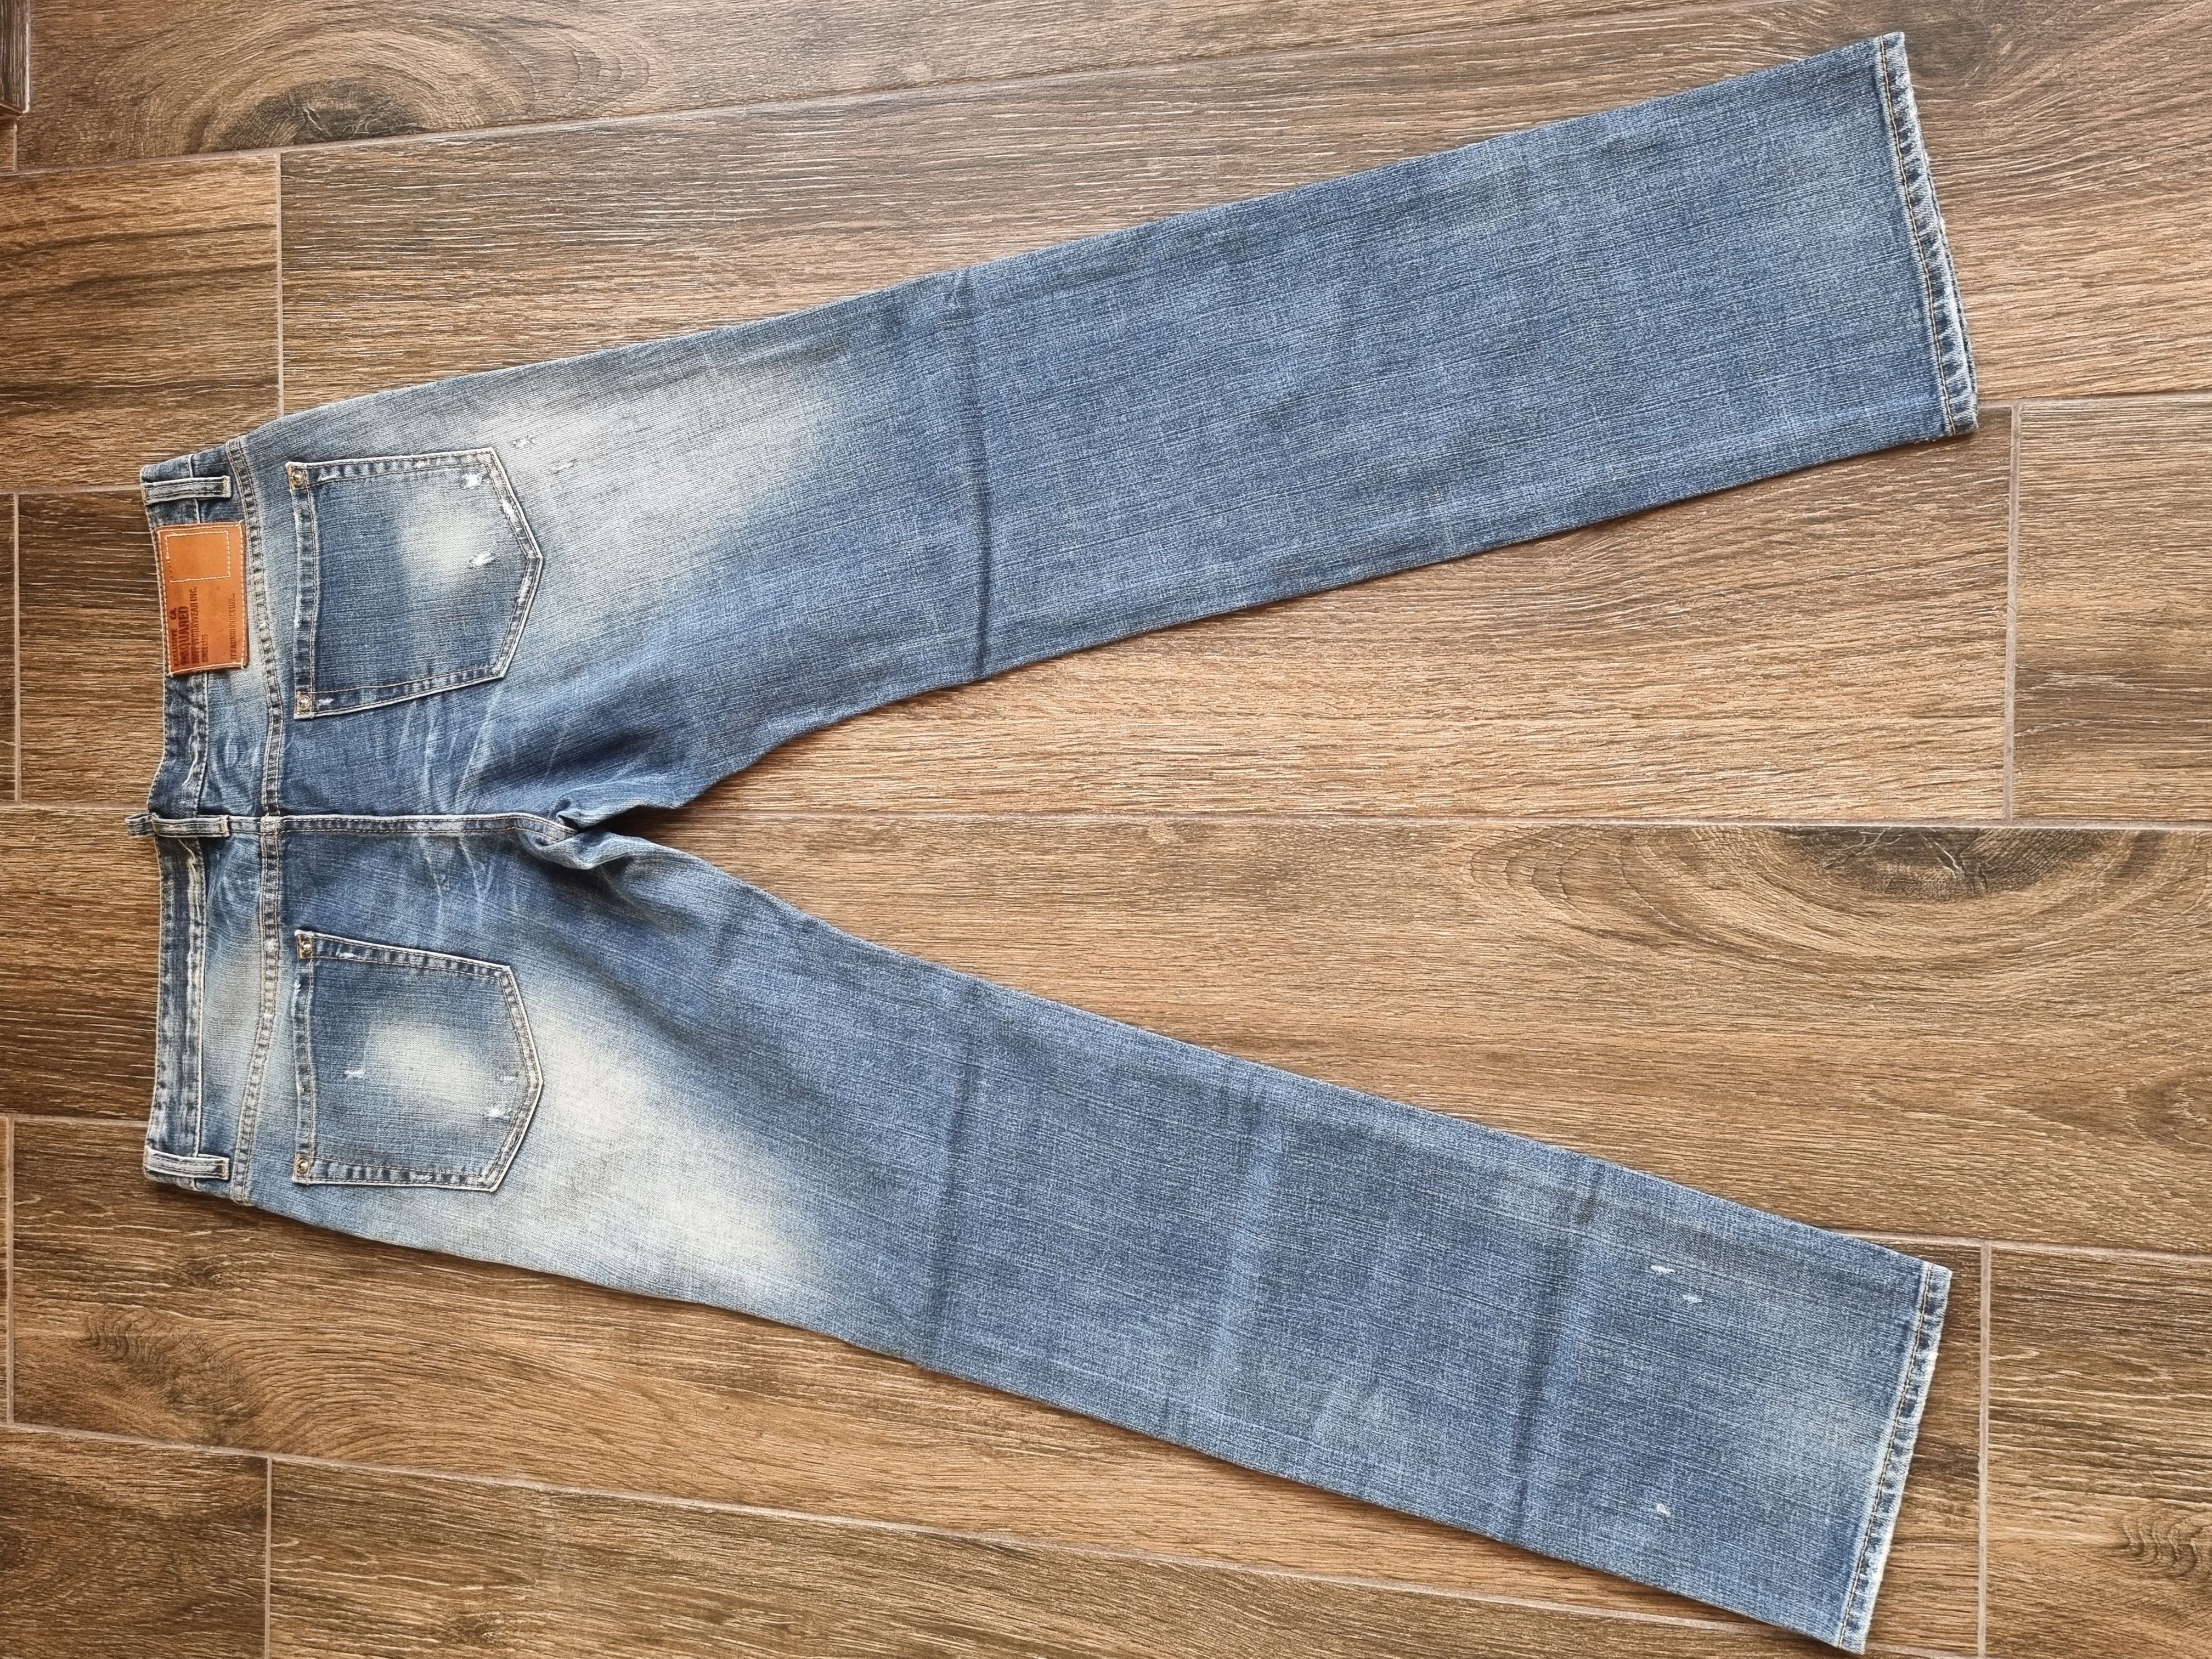 'It's A Hard Knock Life' stonewashed distressed jeans - 8